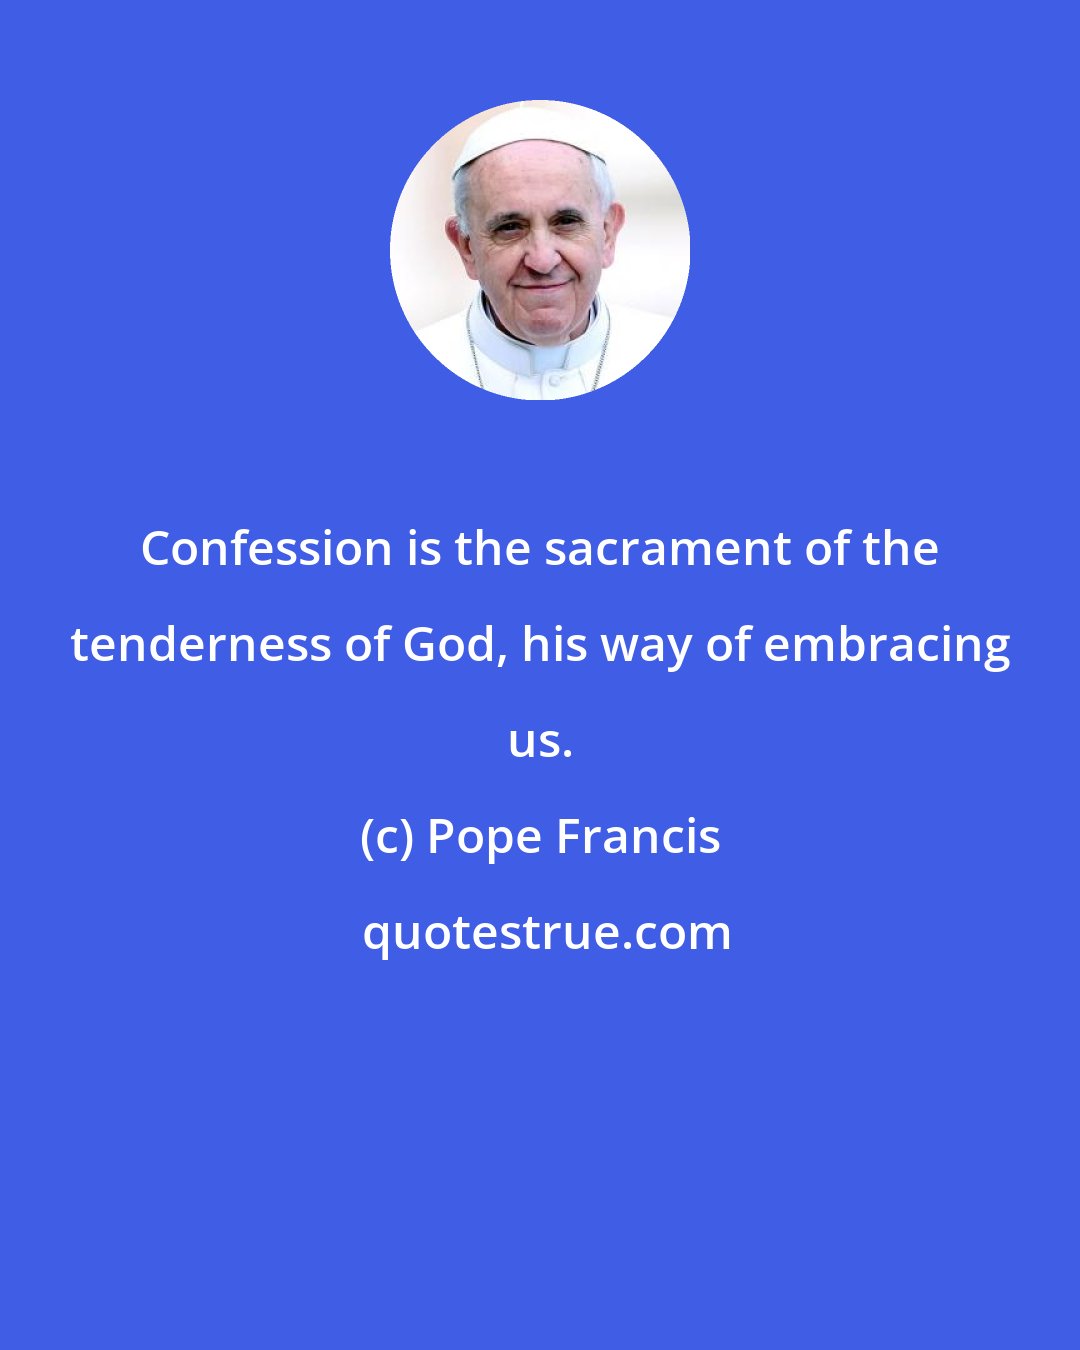 Pope Francis: Confession is the sacrament of the tenderness of God, his way of embracing us.